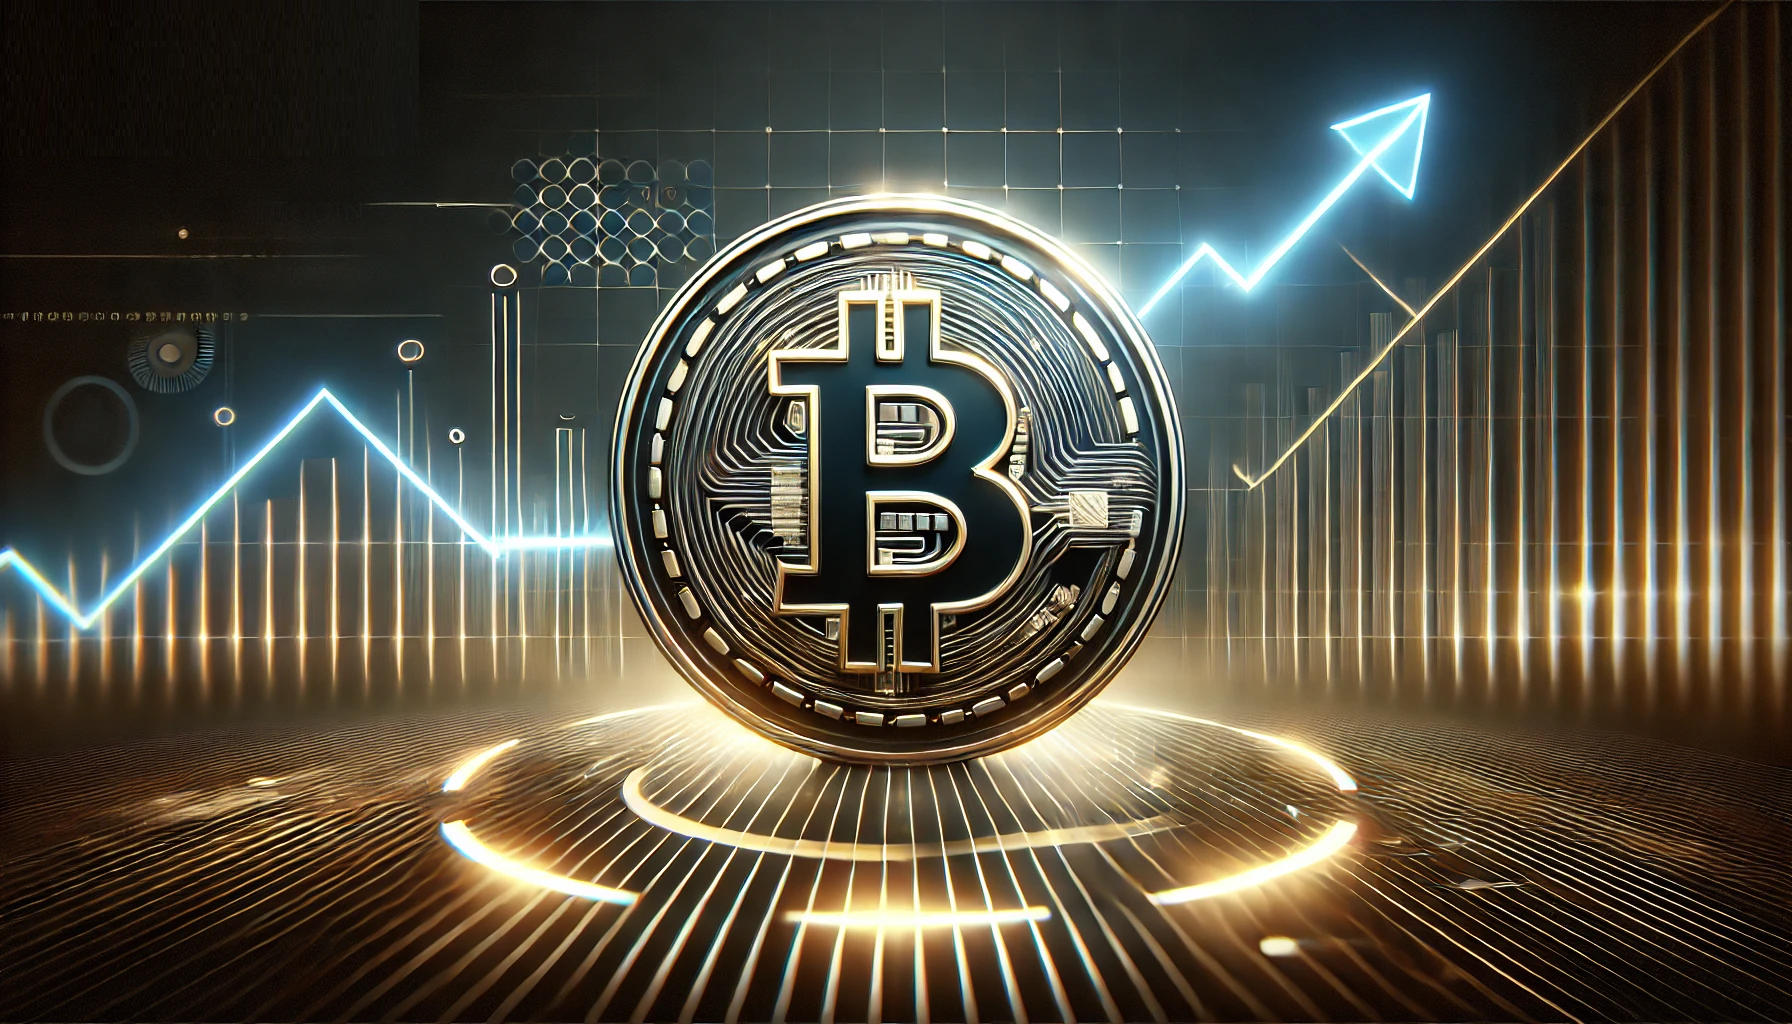 Bitcoin Price Prints Rare Buy Signal With 84% Win Rate, $80,000 Coming?